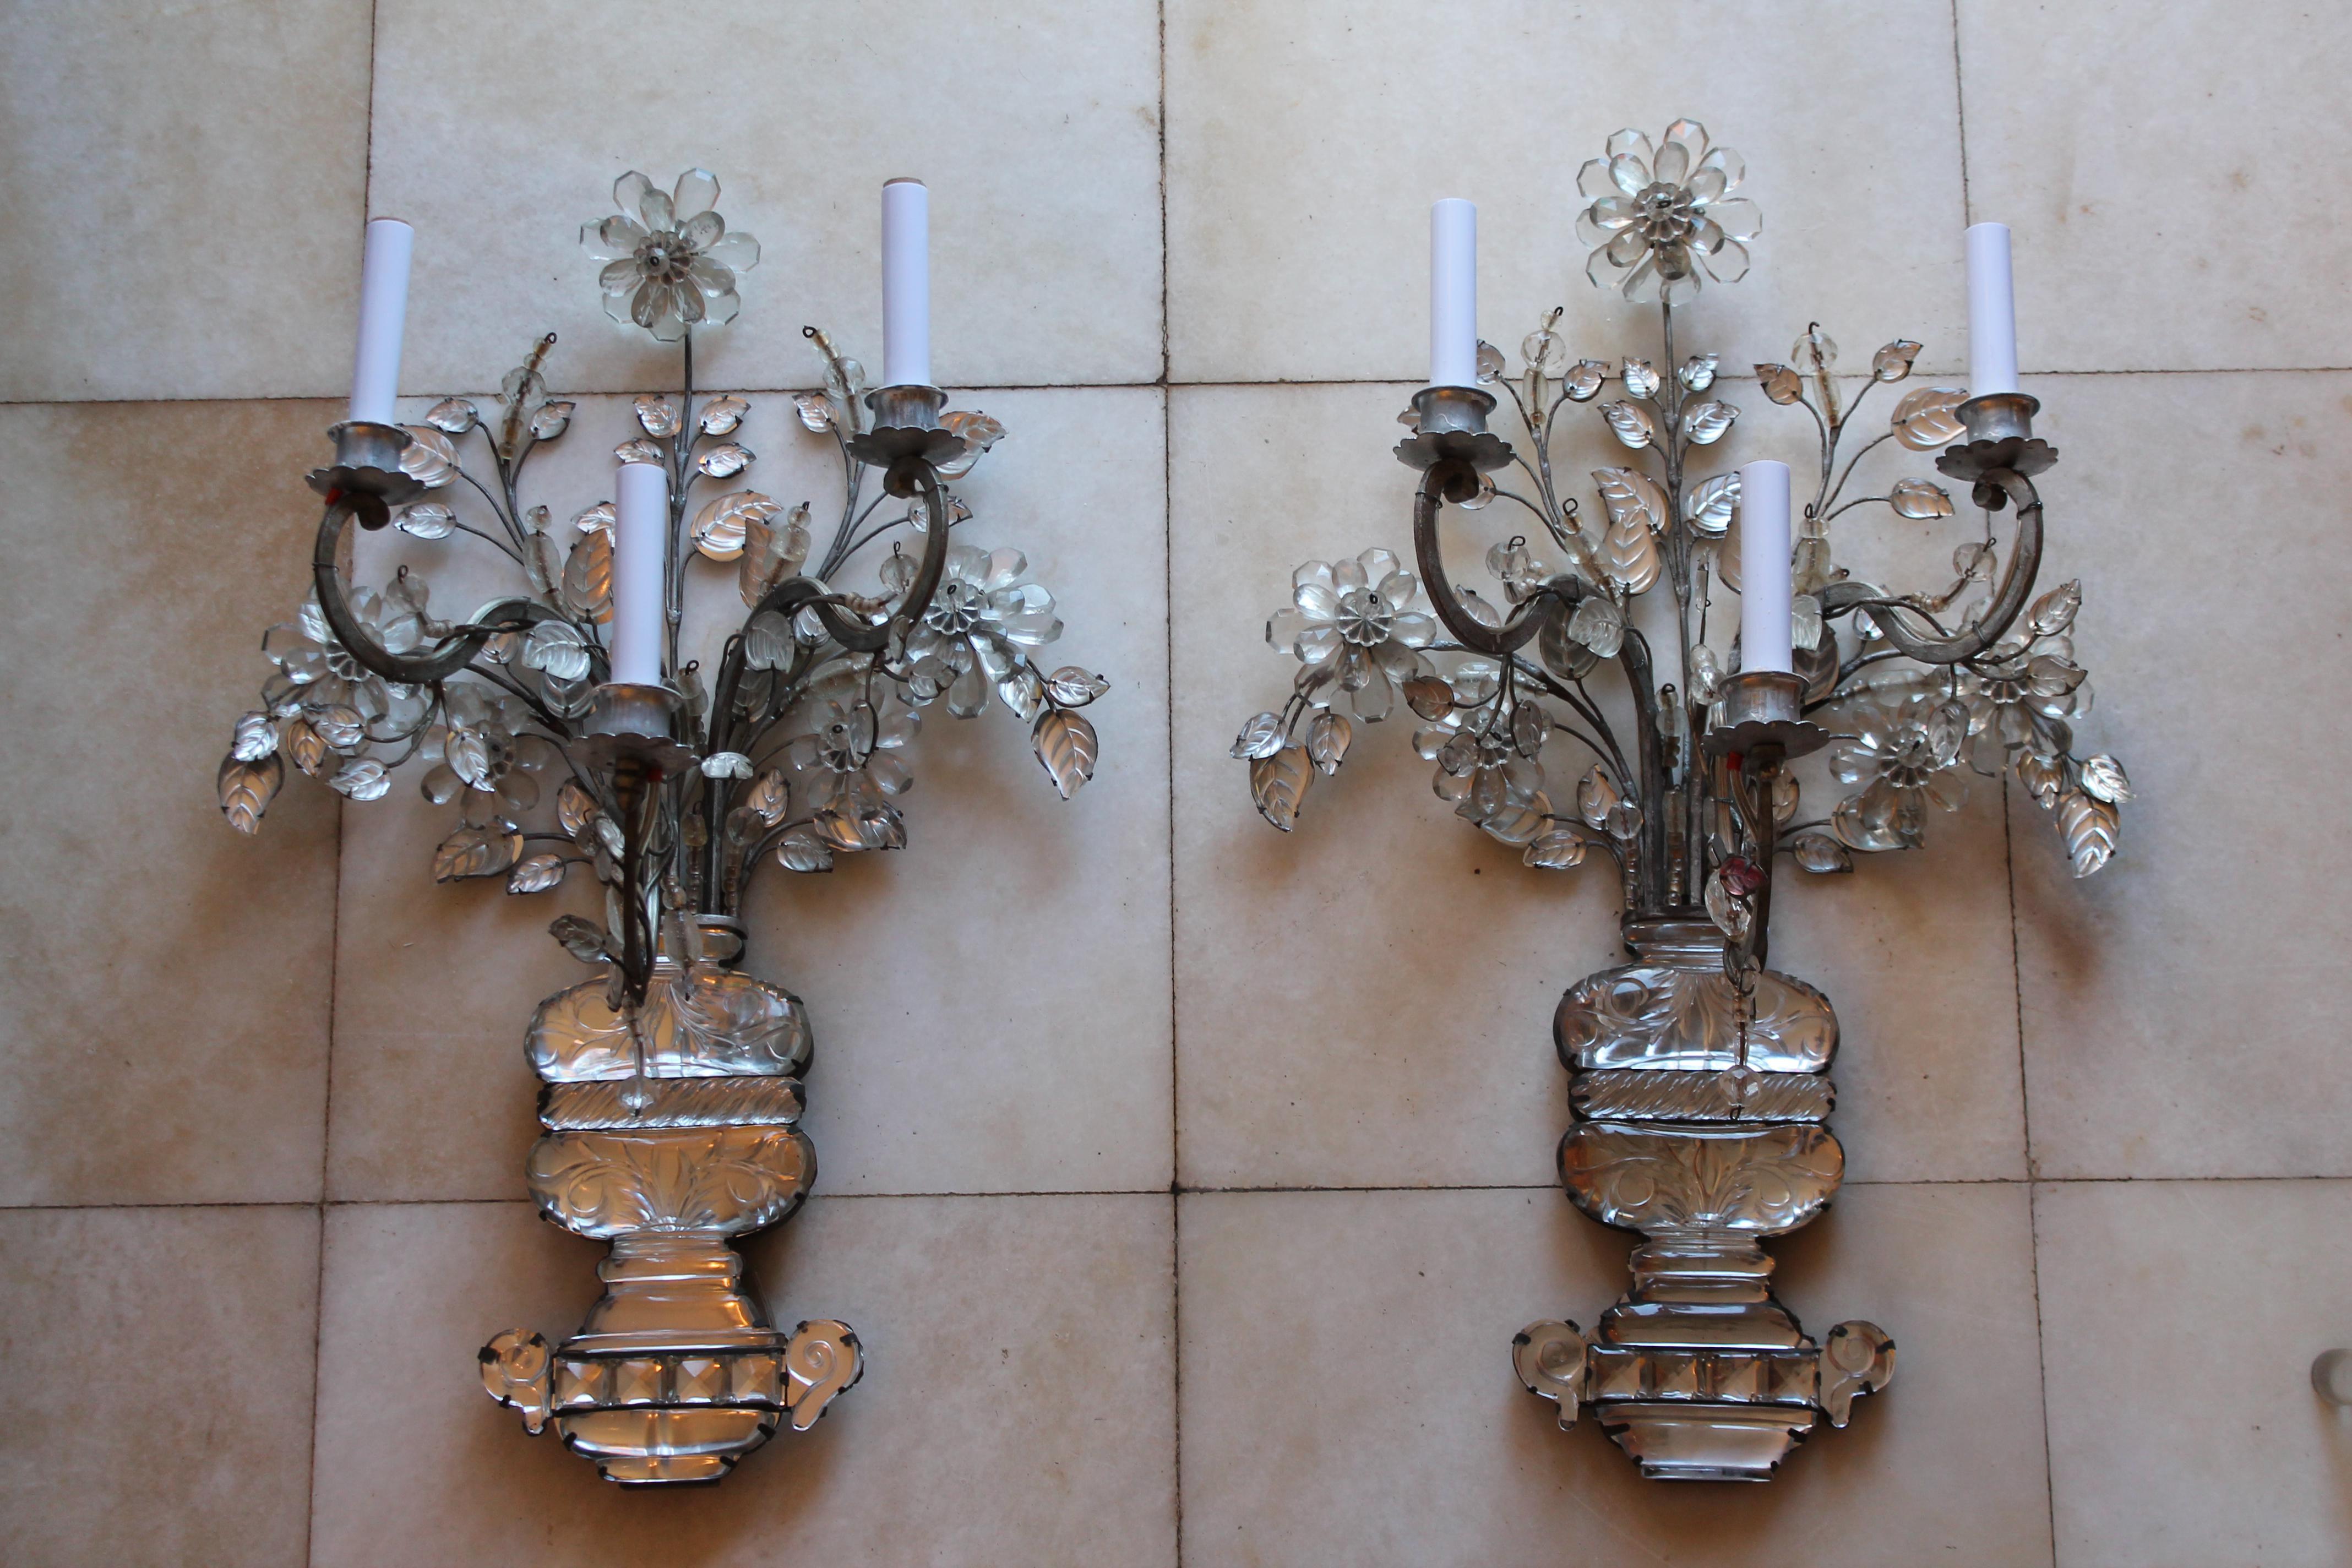 Stunning and rare Pair French Art Nouveau Bronze Framed/ Cut Crystal Floral Bouquet XL Wall Sconces Signed by Maison Bagues Paris. This Bagues signature is on a bronze plaque bolted to the back. Museum quality sconces. I purchased these in Monte